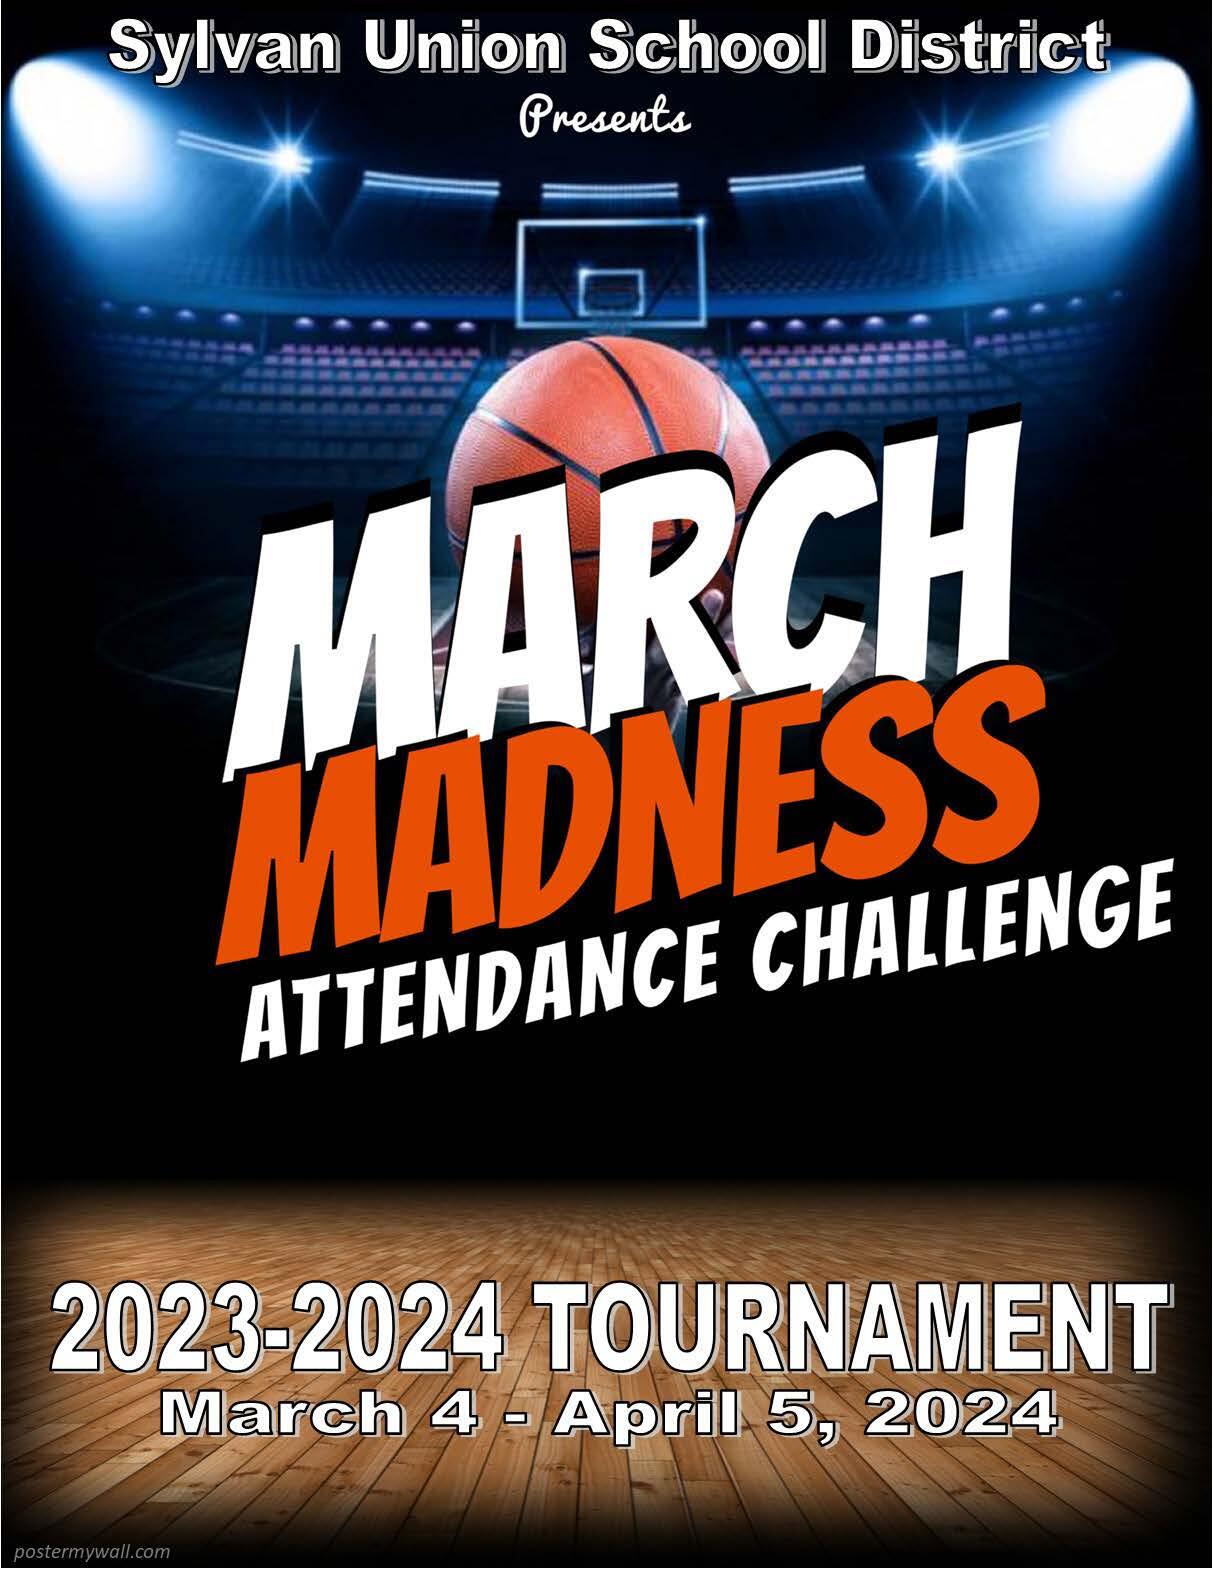 Take the March Madness 2024 Attendance Challenge